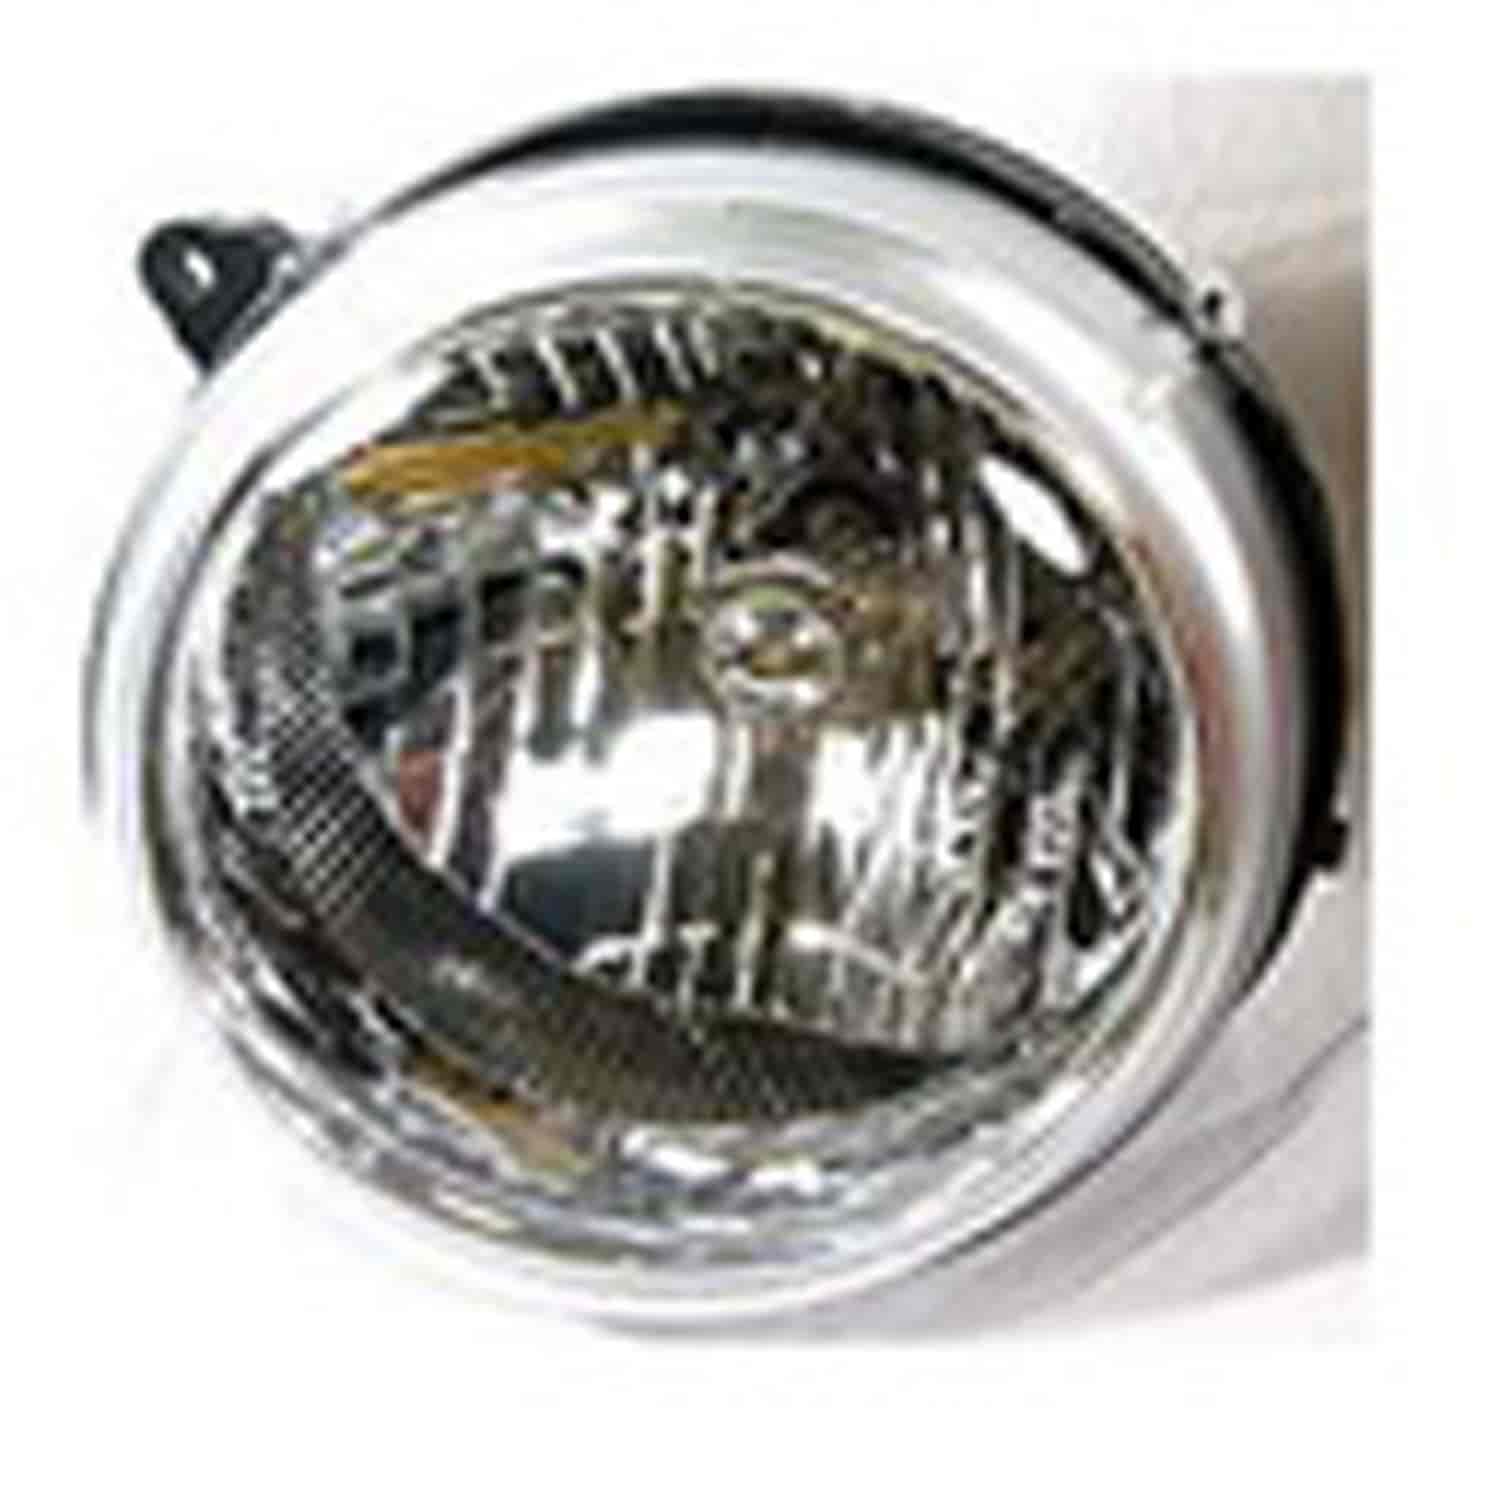 Replacement headlight assembly from Omix-ADA, Fits right side on 2002 Jeep Liberty KJ built before November 05 2002.